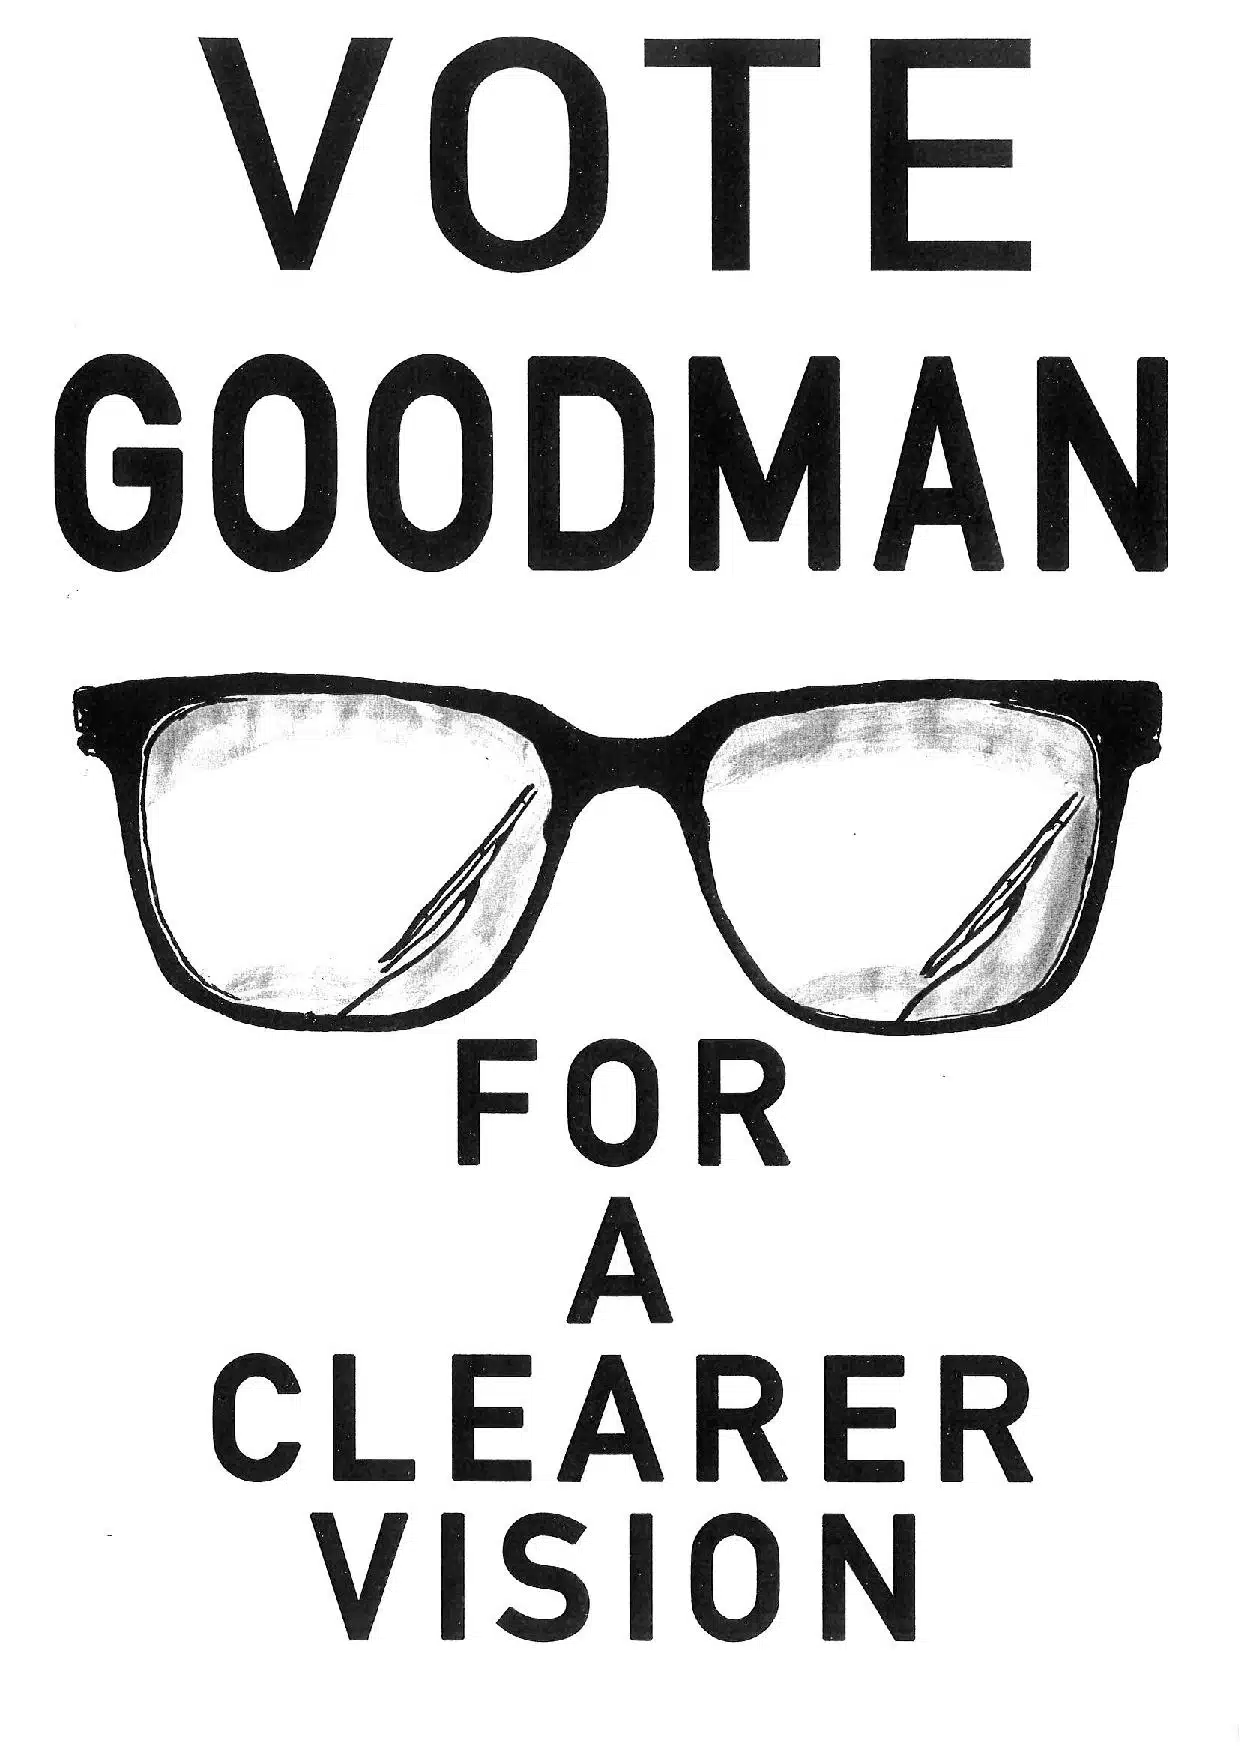 Design features a black ink line drawing in the centre of a pair of spectacles. The spectacles have a small wiper attached to each lens. The lenses seem to be slightly cloudy, particularly at the edges. Above this are the words 'Vote Goodman' in large black lettering, all in capitals. Underneath the spectacles are the words 'For a clearer vision' spaced over four lines, also in black capital lettering but slightly smaller than the words above.